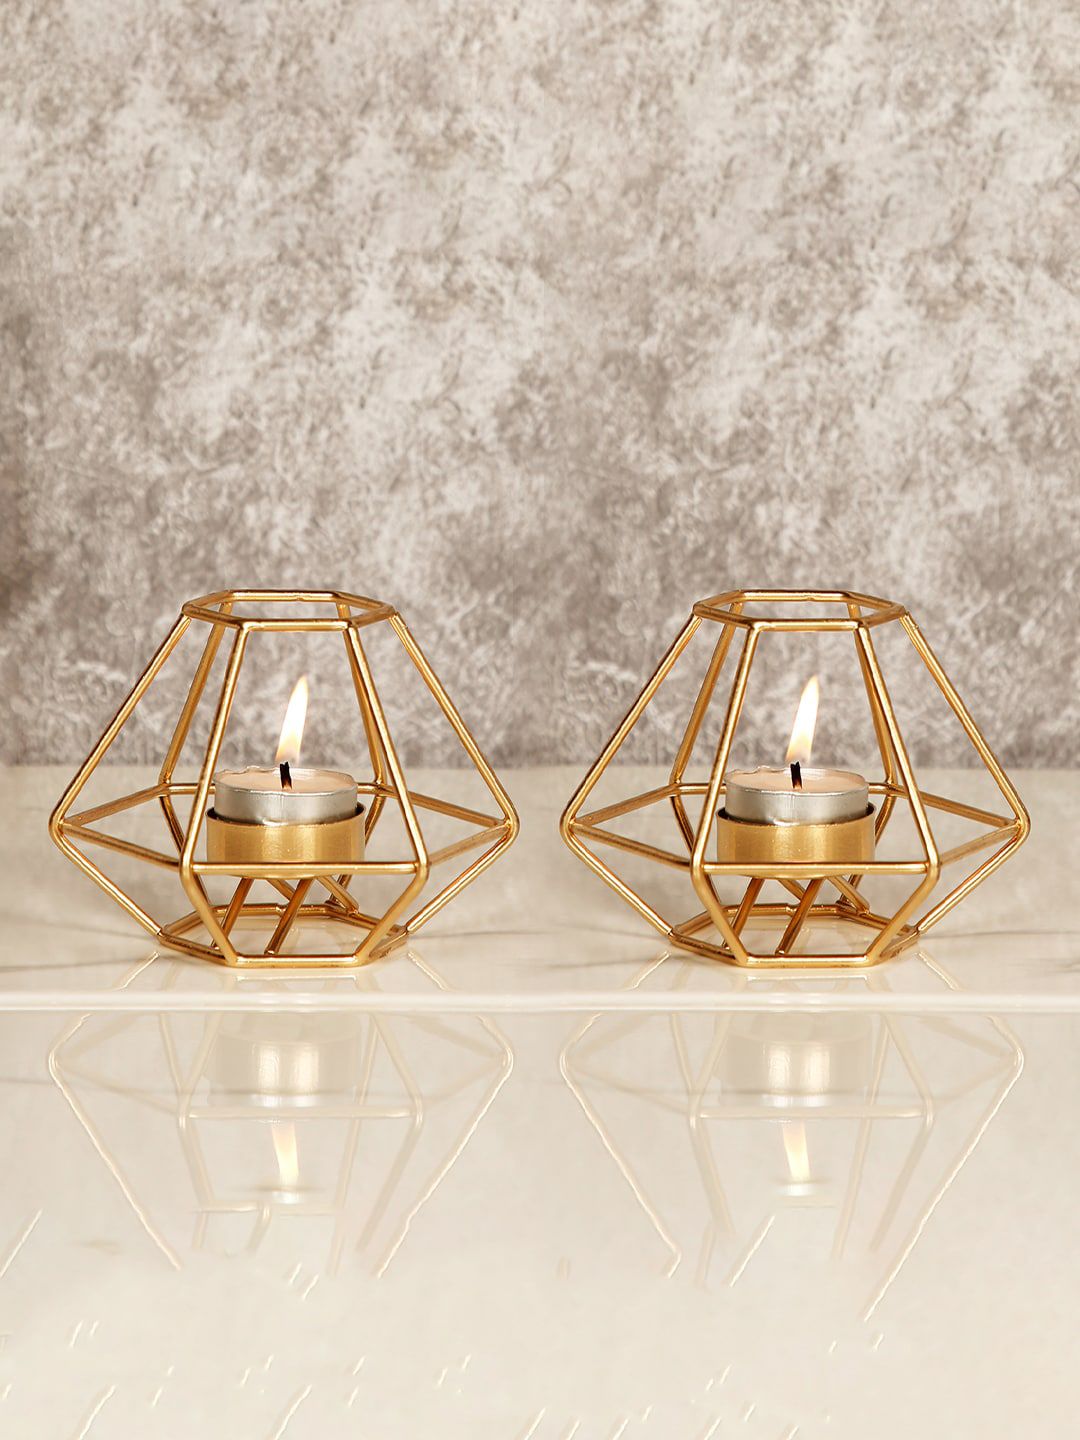 CraftVatika Gold-Toned Metal Tealight Candle Holder Stand for Home Diwali Decor Price in India